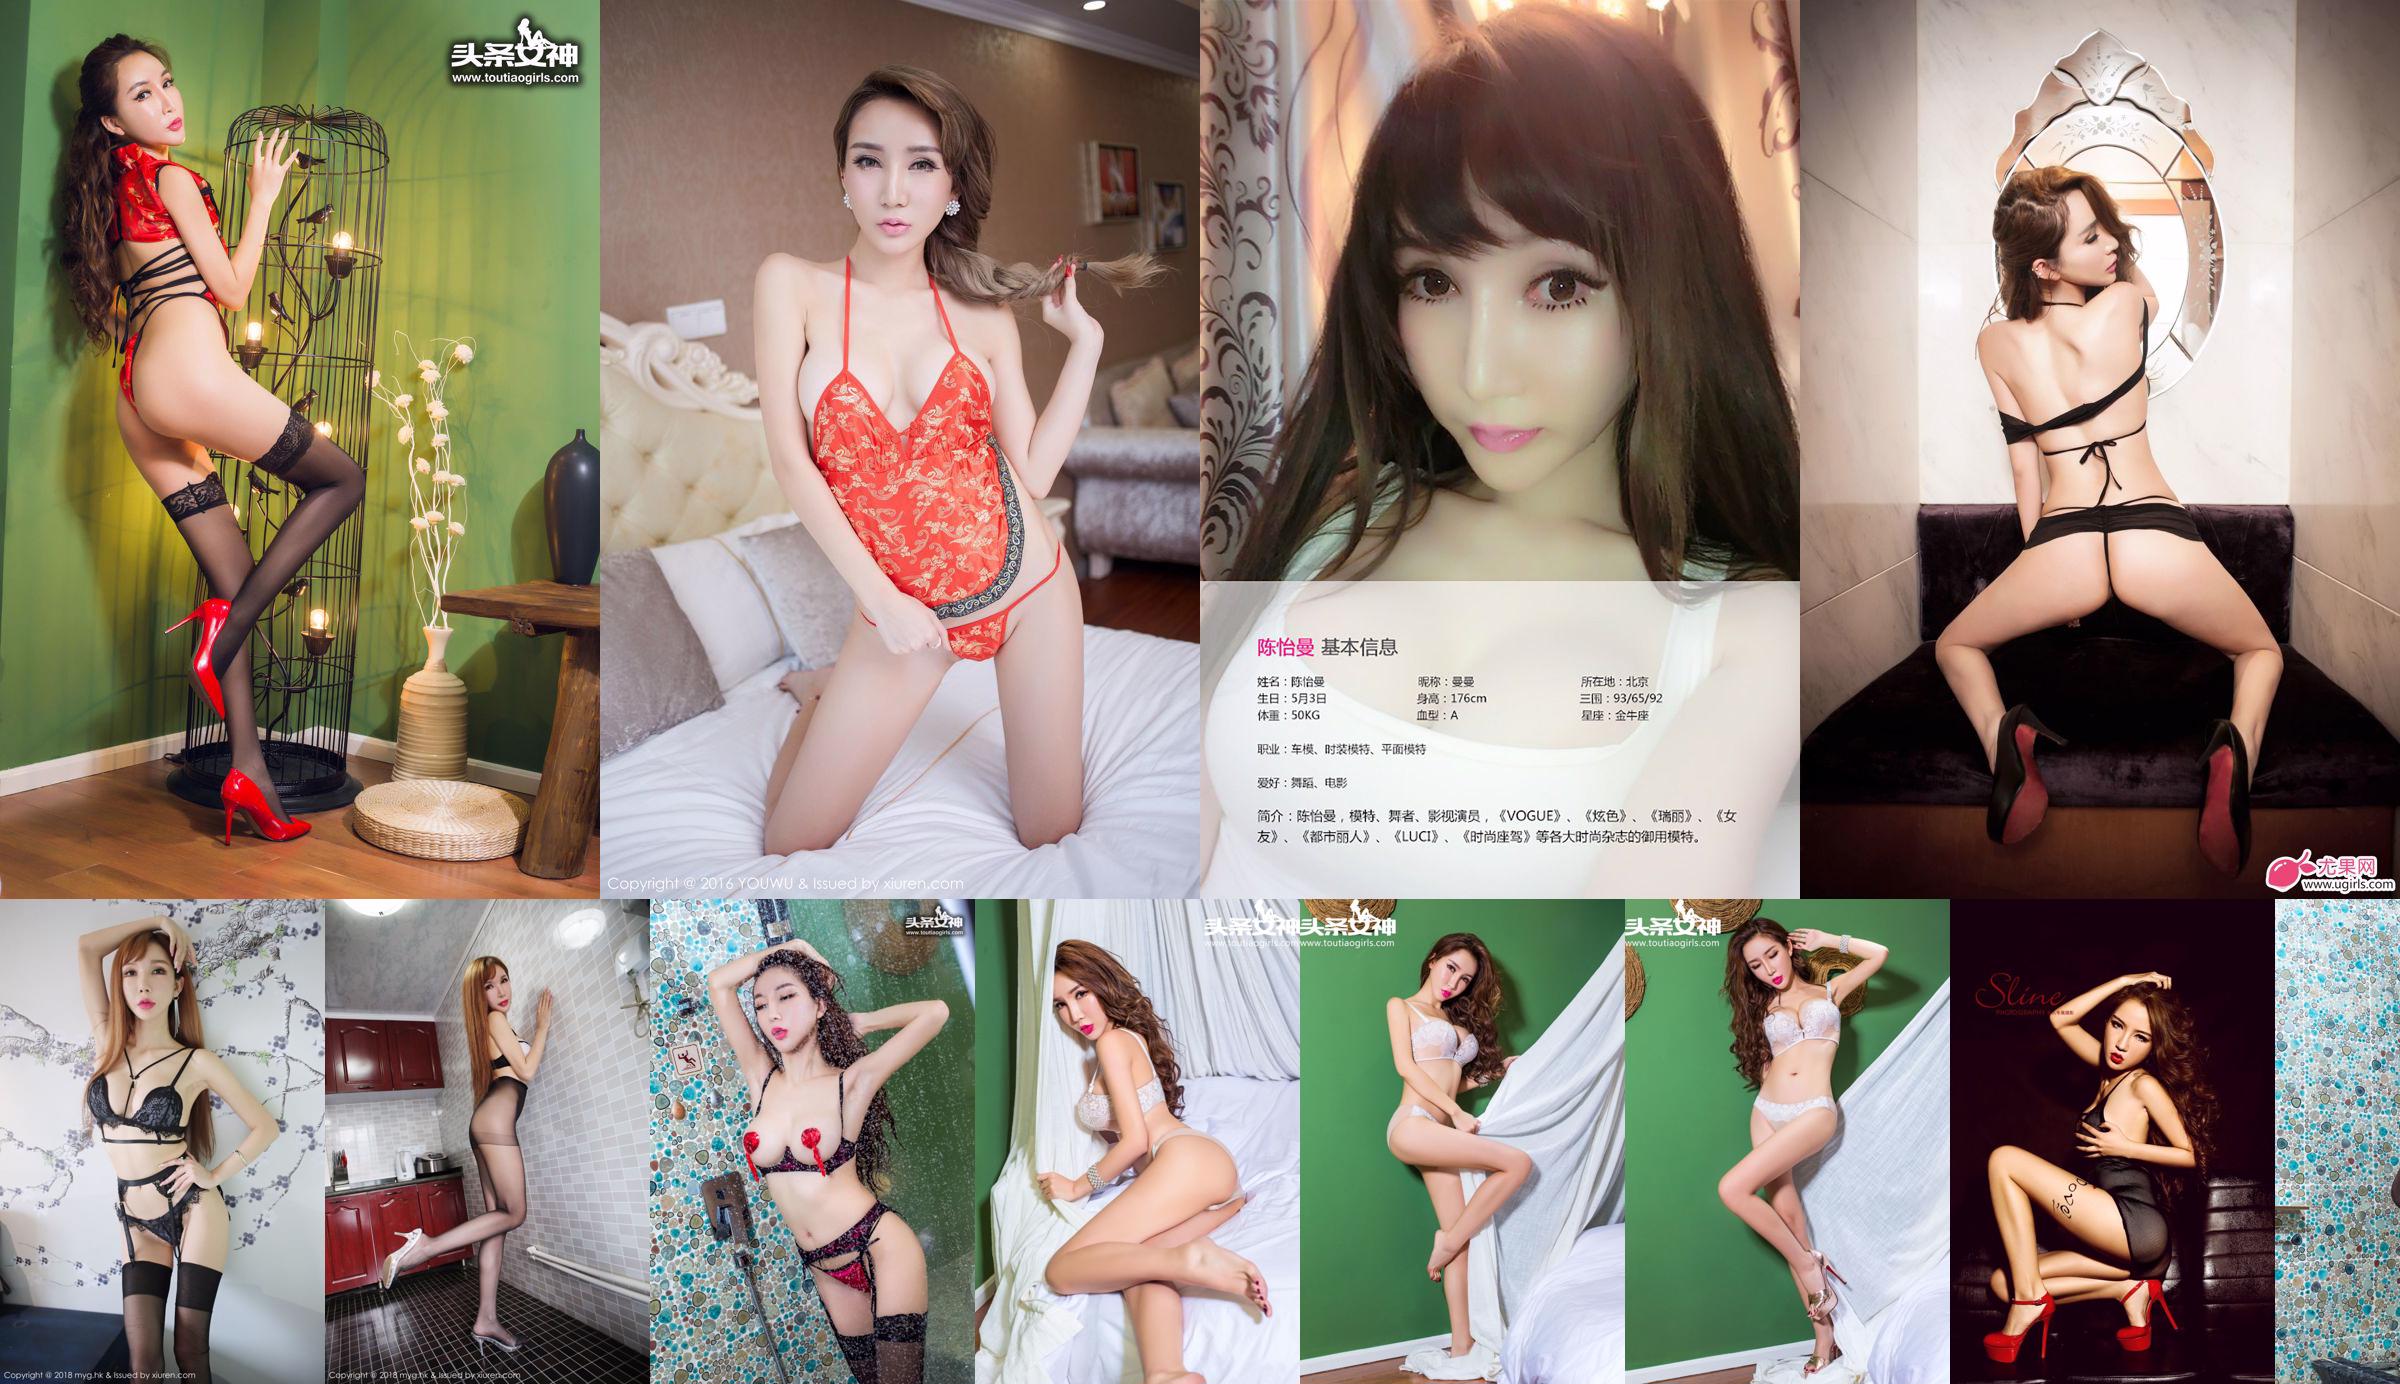 Chen Yiman "Looking Like Demon Girl, Sexy and Hot" [Love Ugirls] No.001 No.c25bd3 Page 19